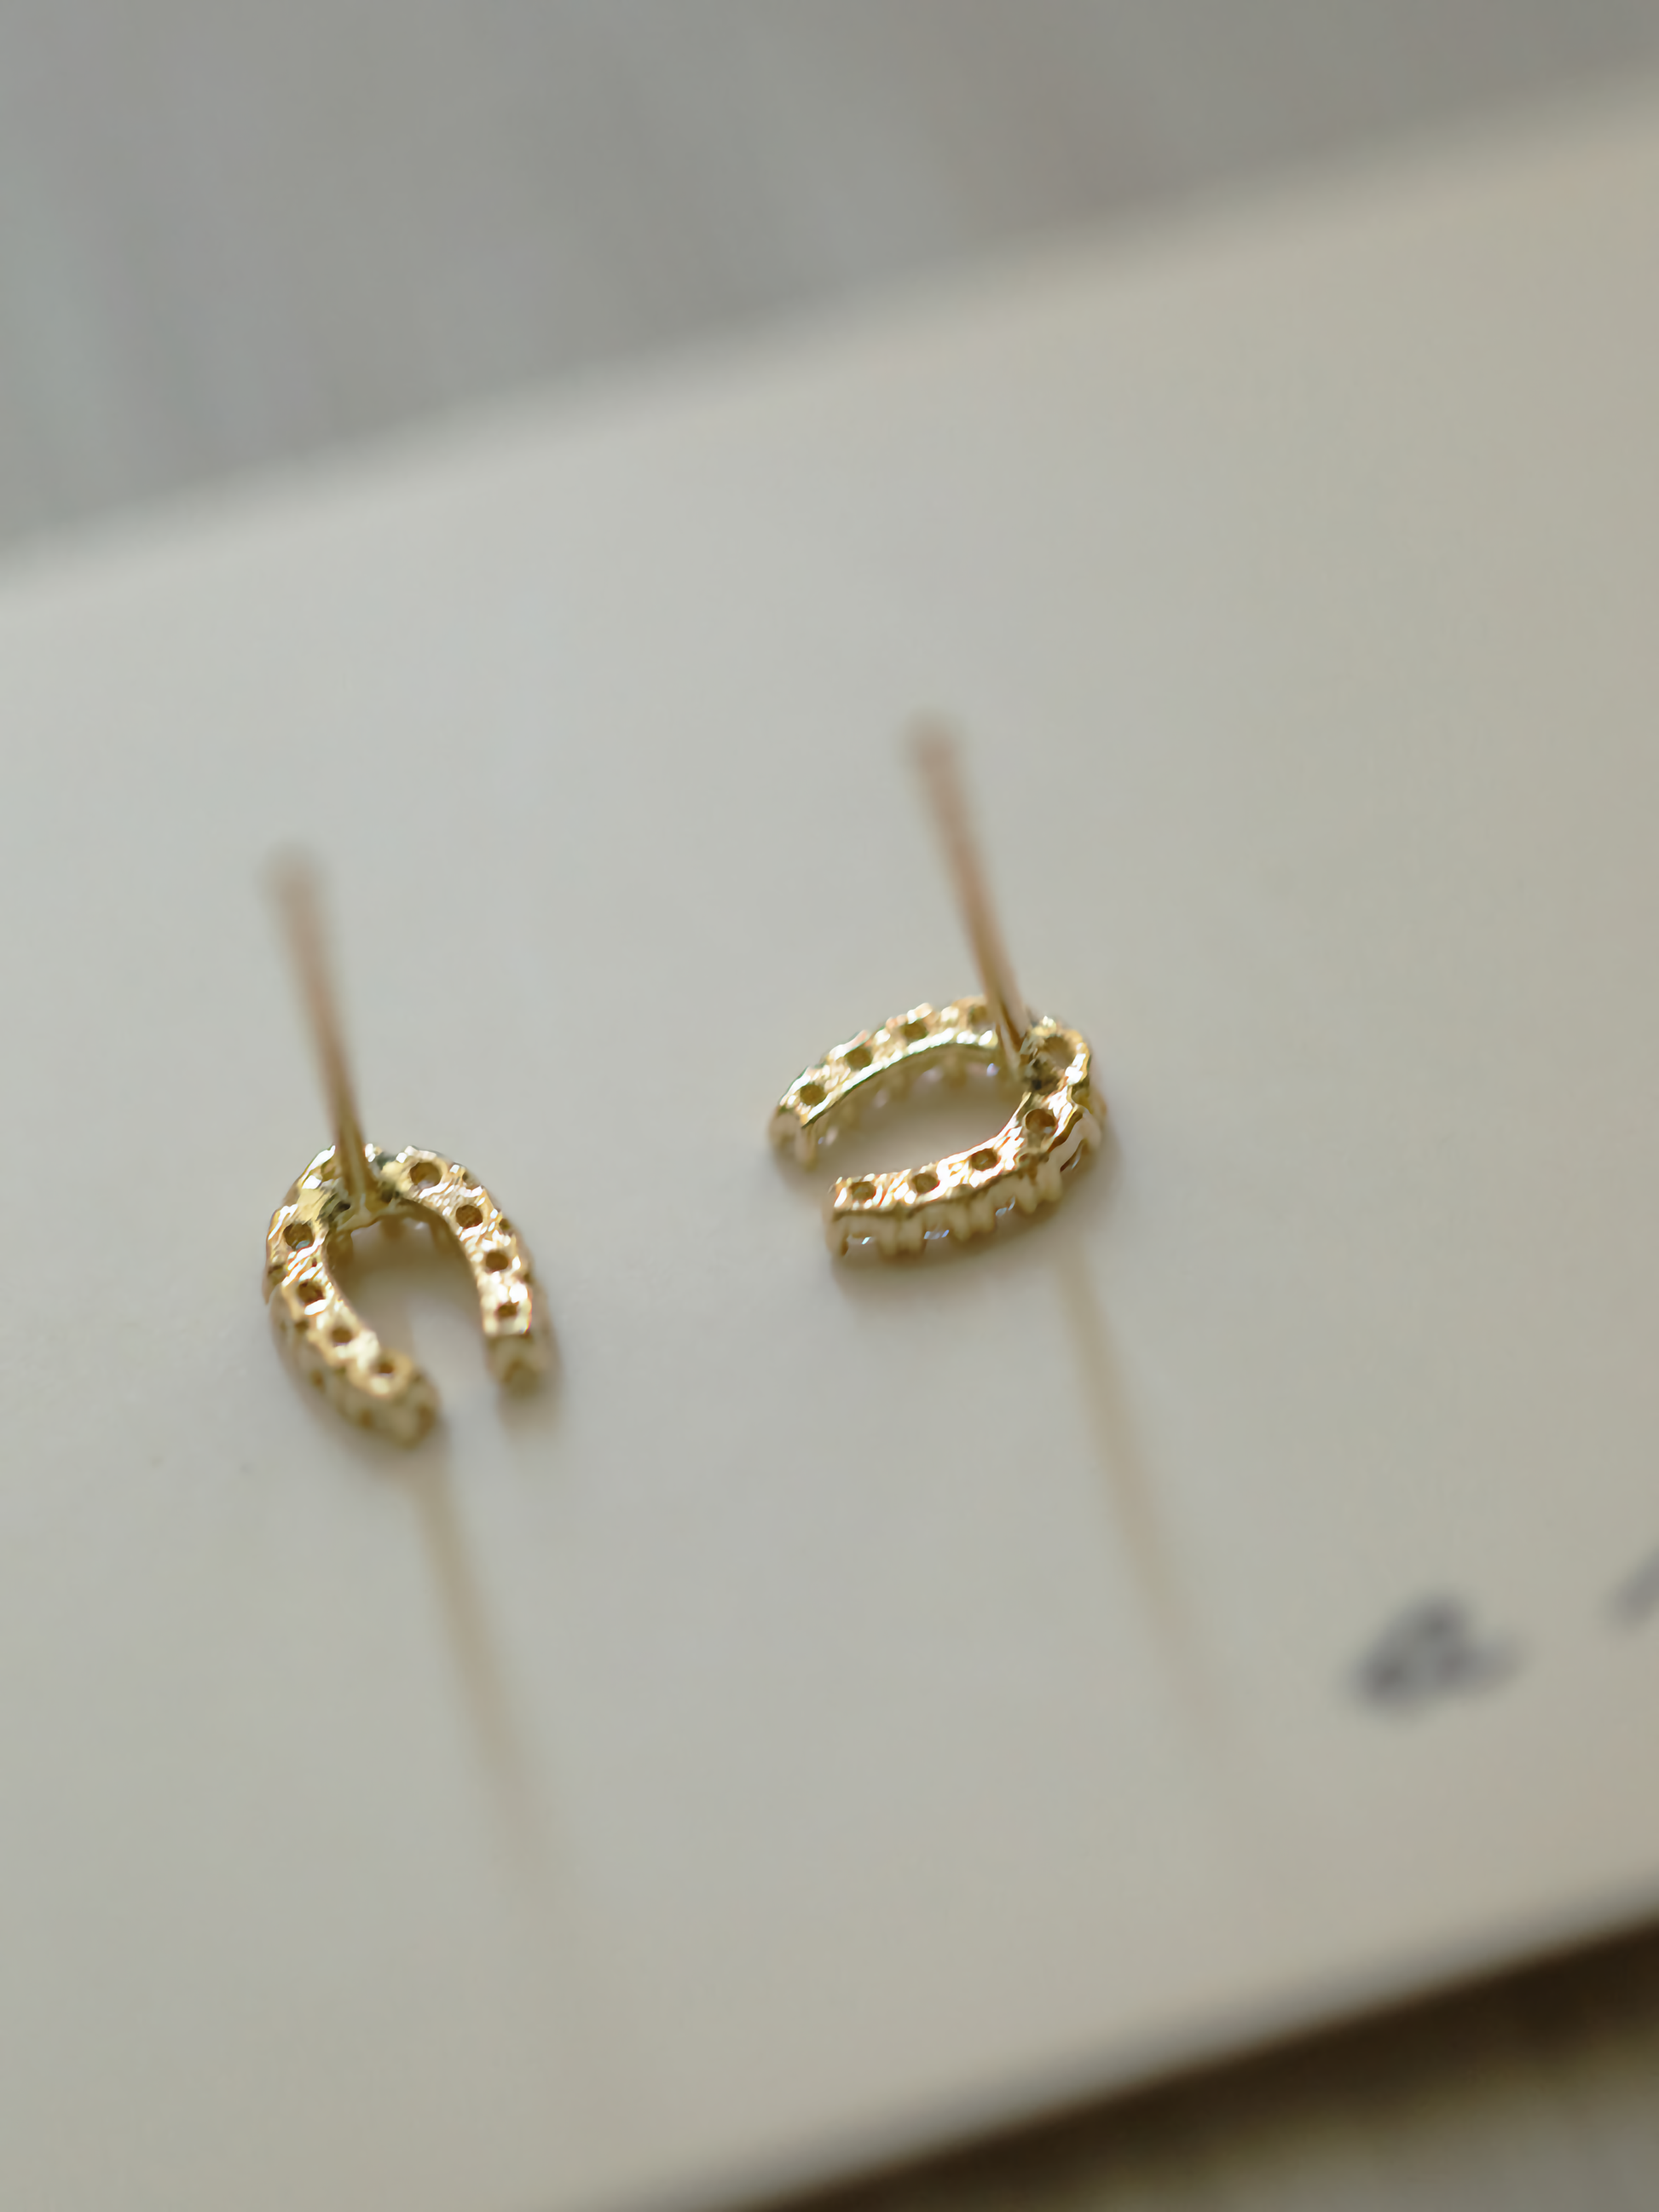 9ct solid gold studs designed as horseshoes, a chic embodiment of luck and style in jewelry form.